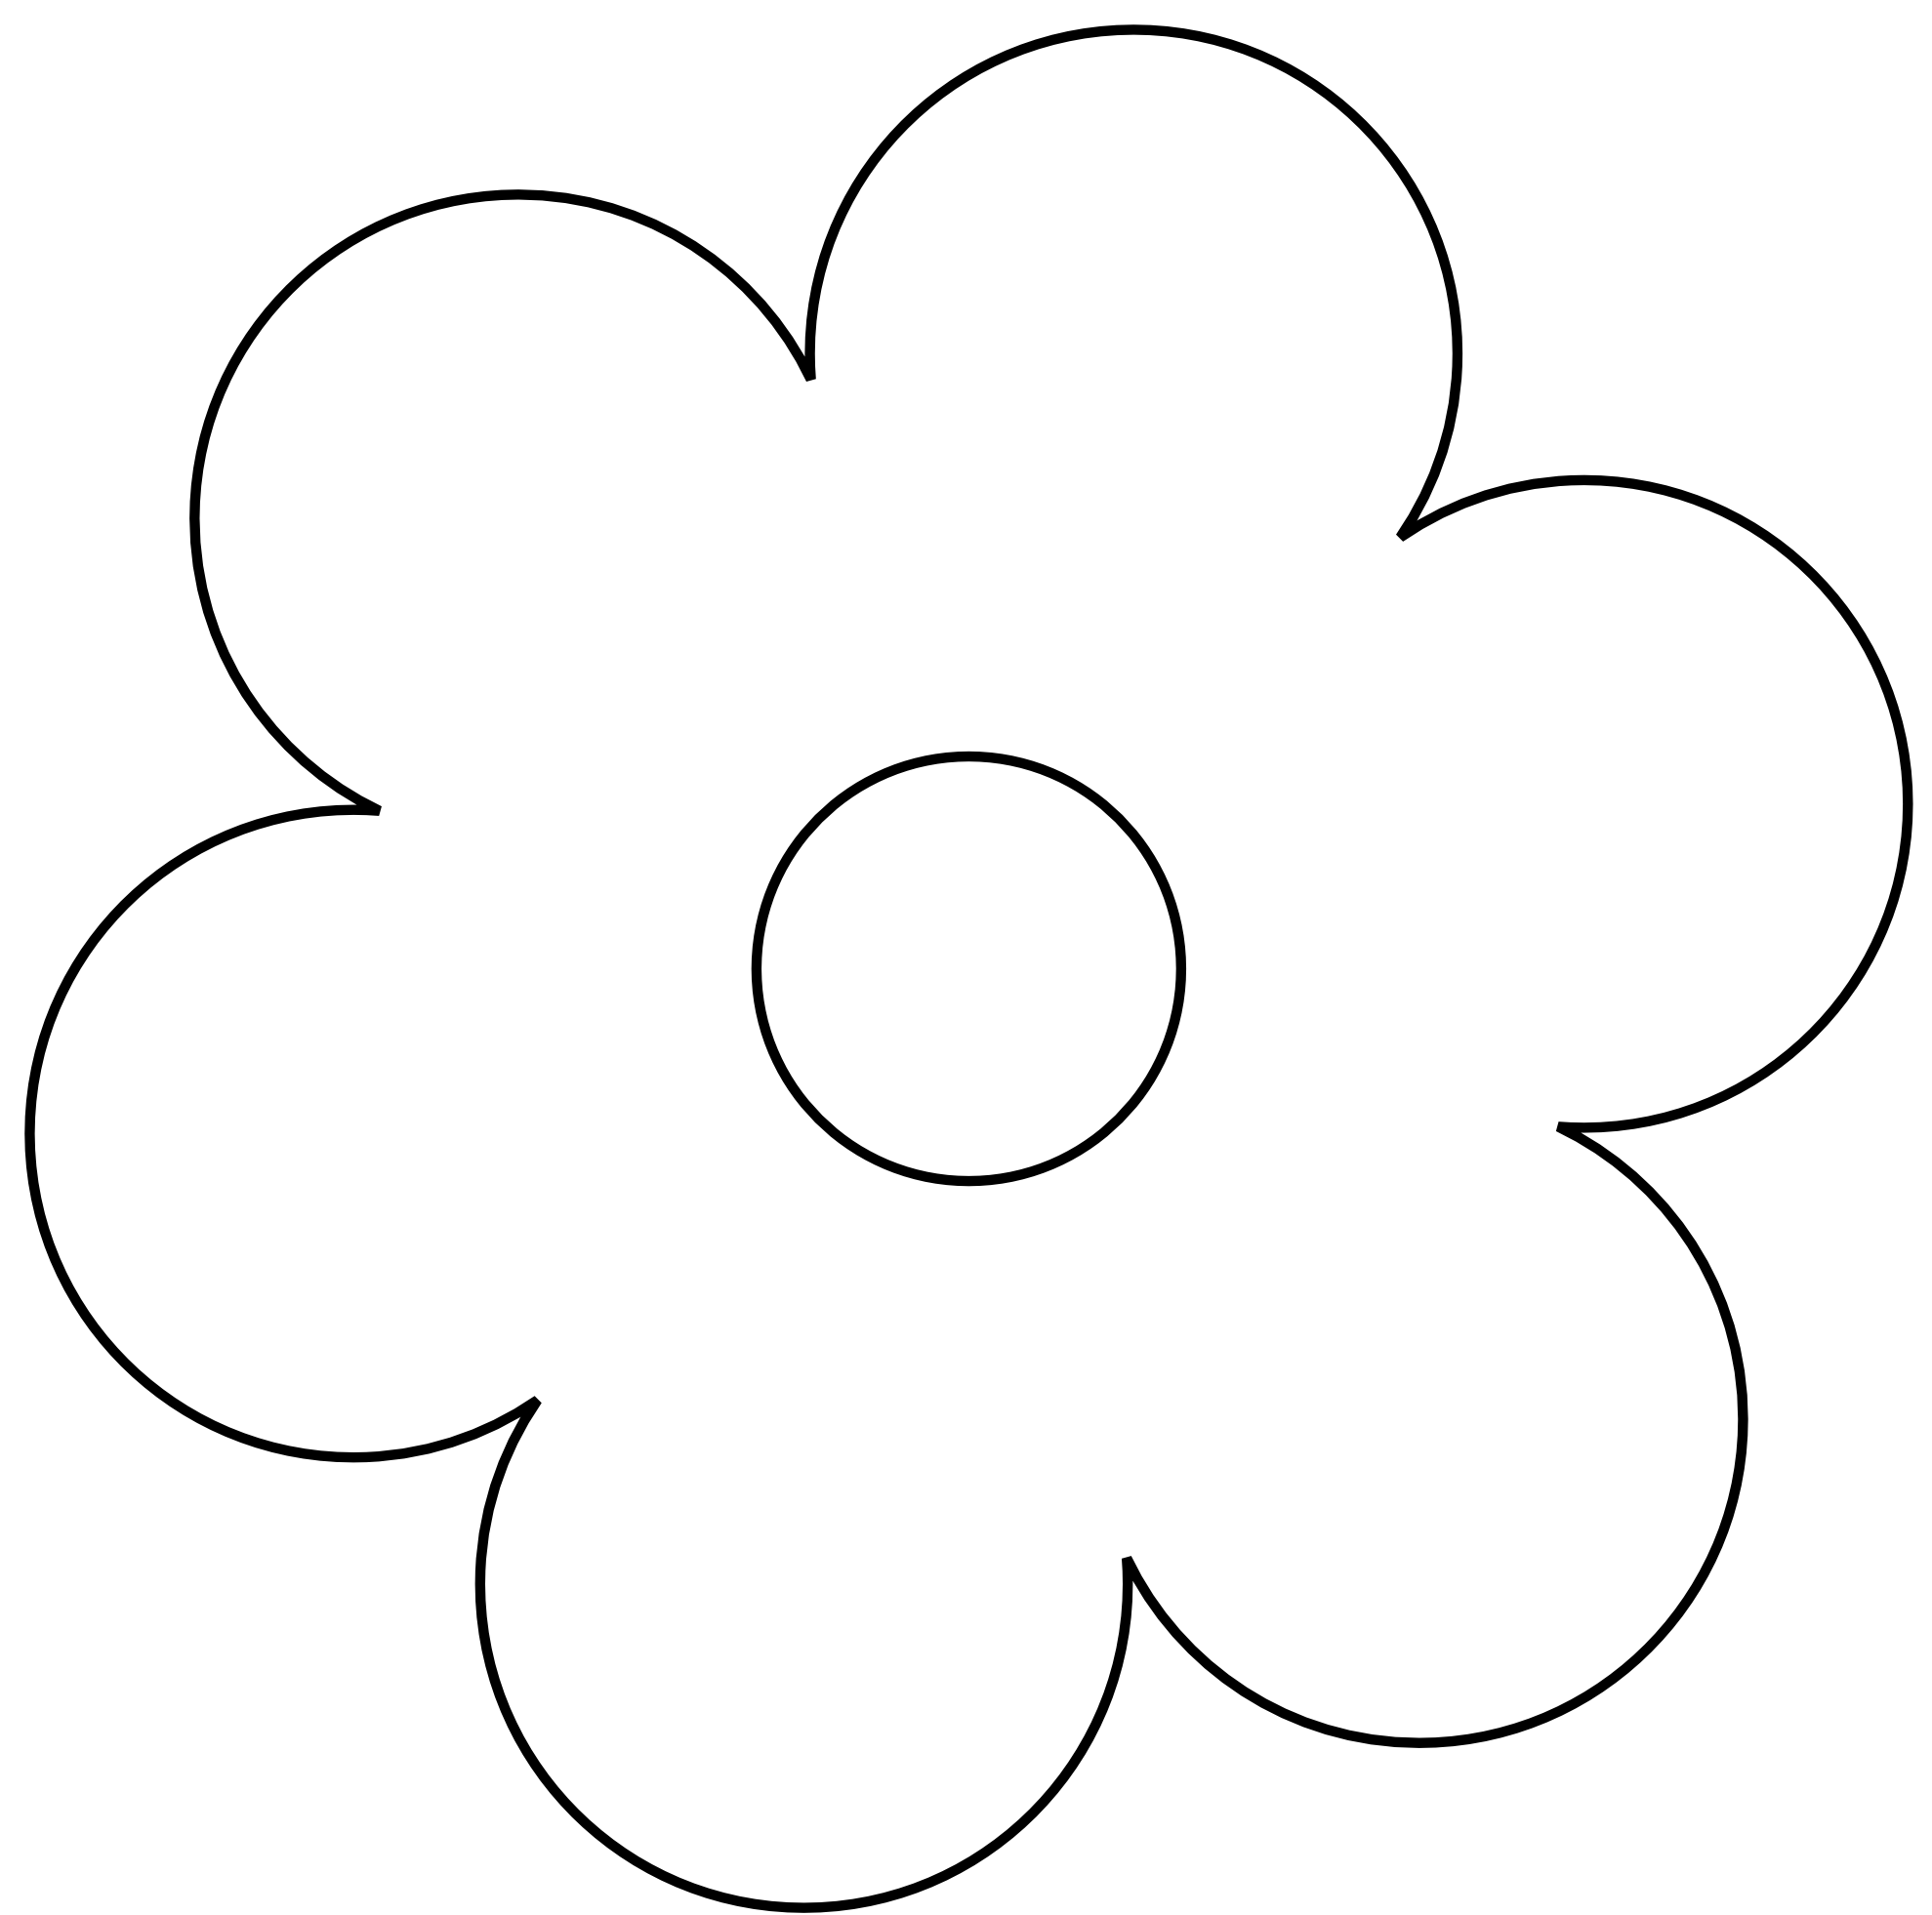 Free Black And White Flower Images, Download Free Clip Art.